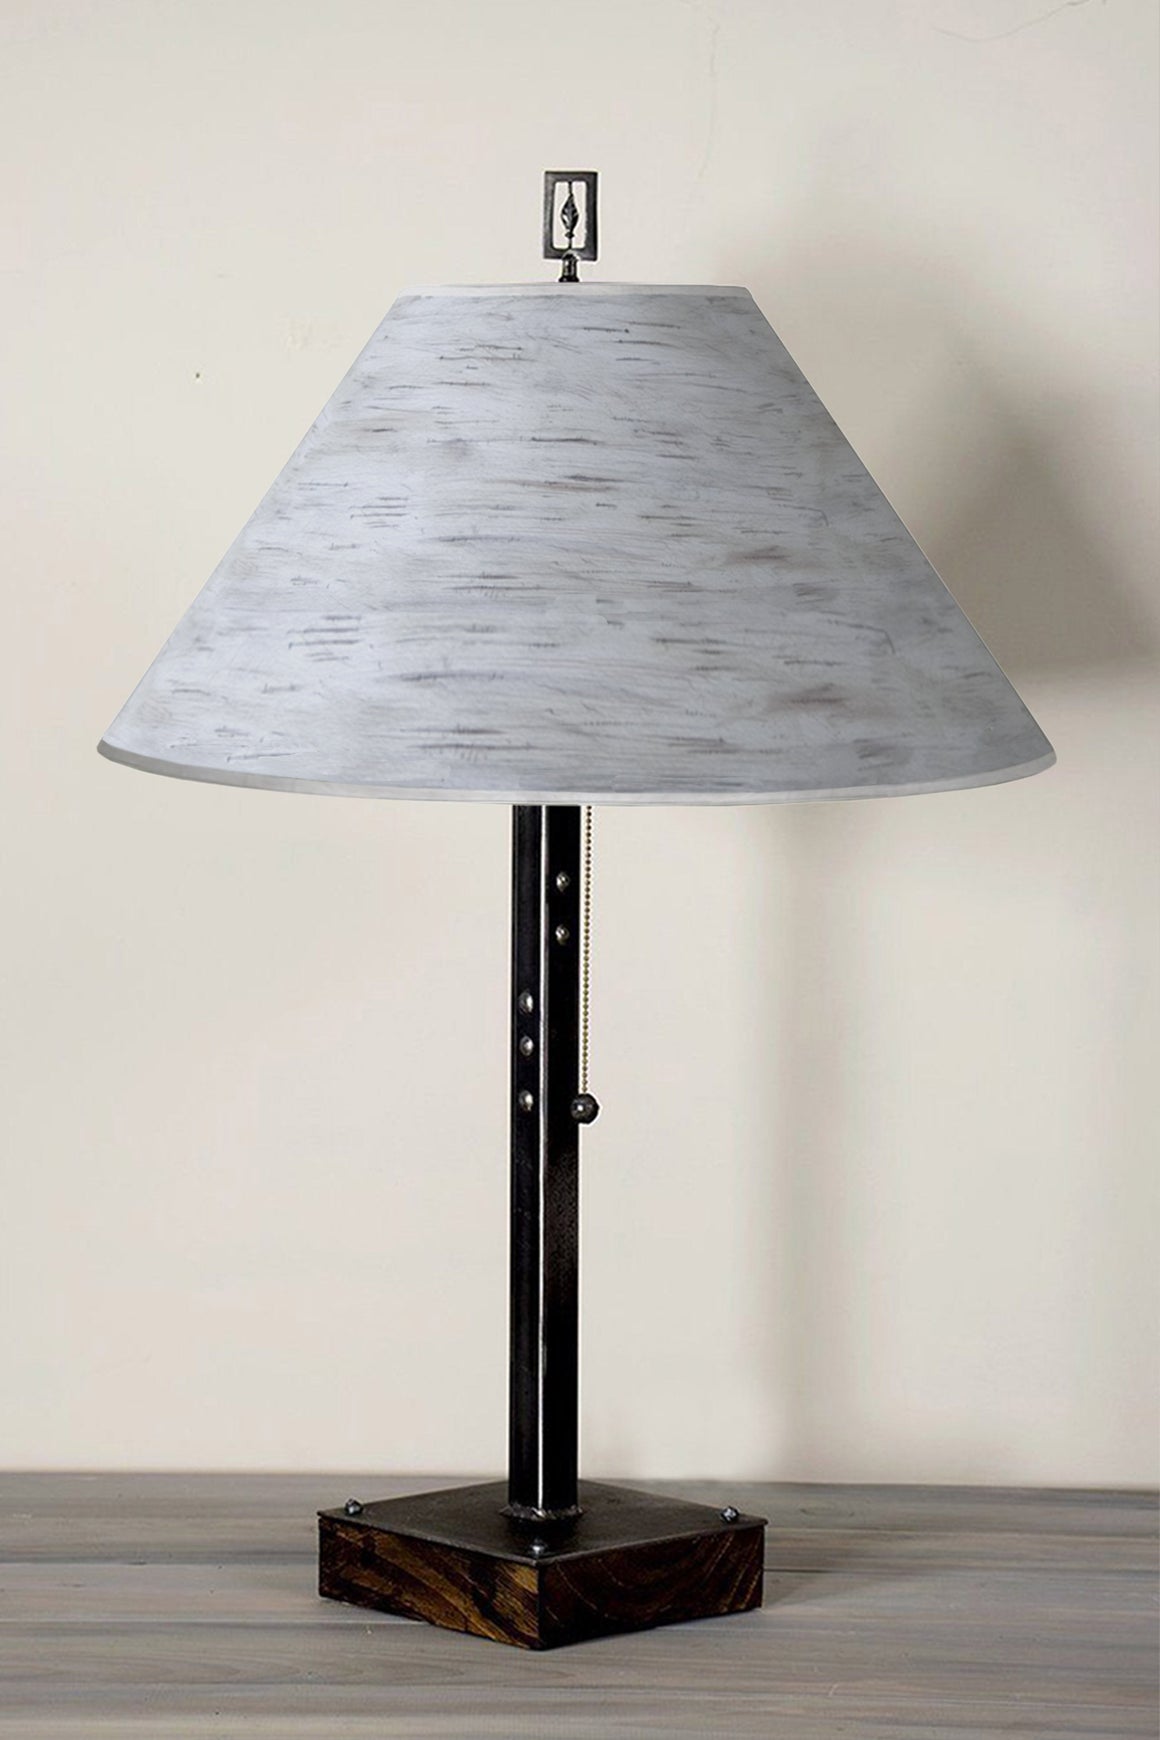 Steel Table Lamp on Wood with Large Conical Shade in Simply Birch